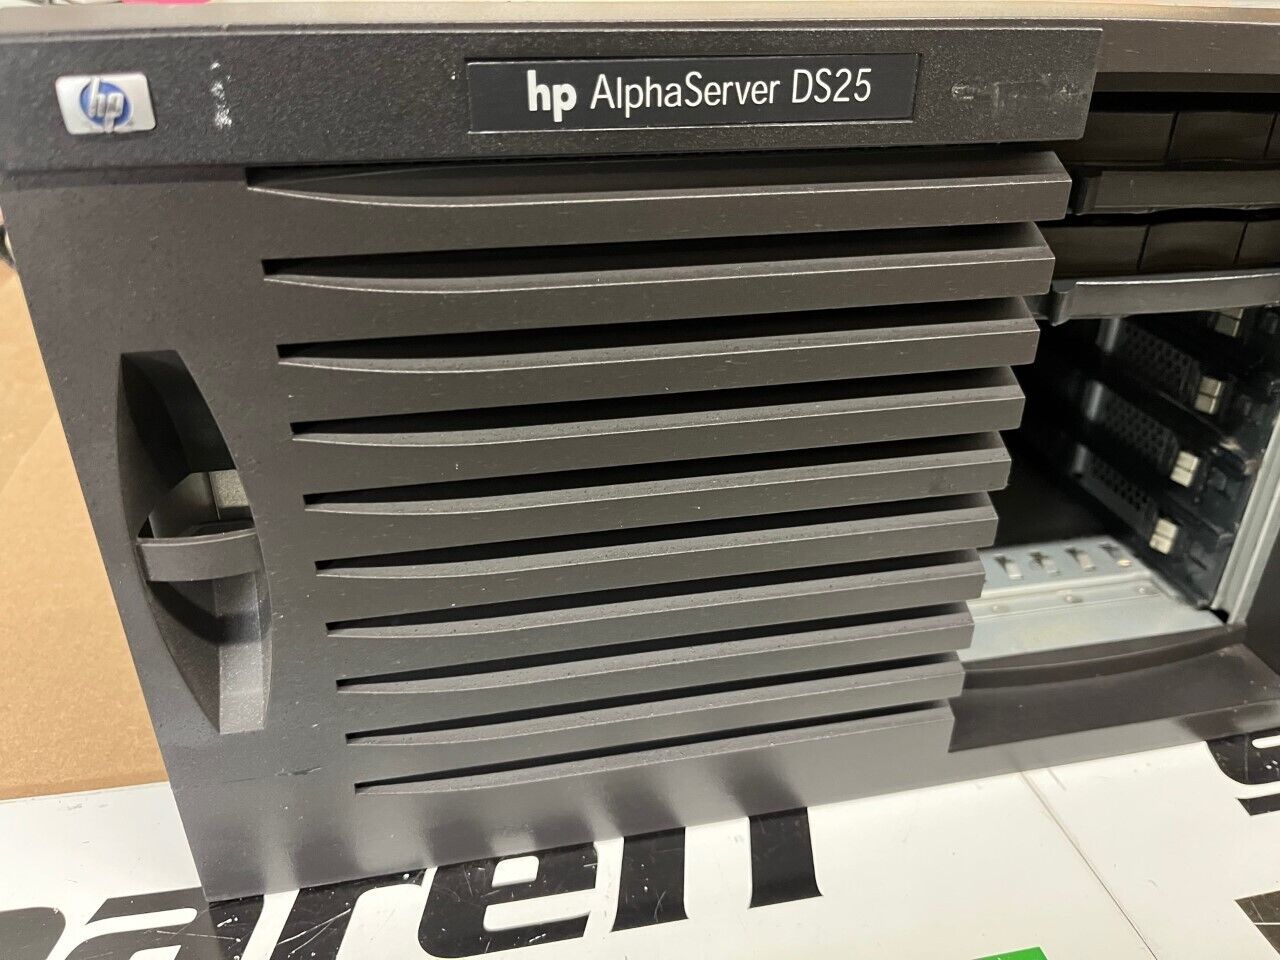 HP ALPHASERVER DS25 1P 1GHZ DH-57AAB-AA 1GB DUAL POWER SUPPLY 6 BAY DRIVE CAGE (USADO)